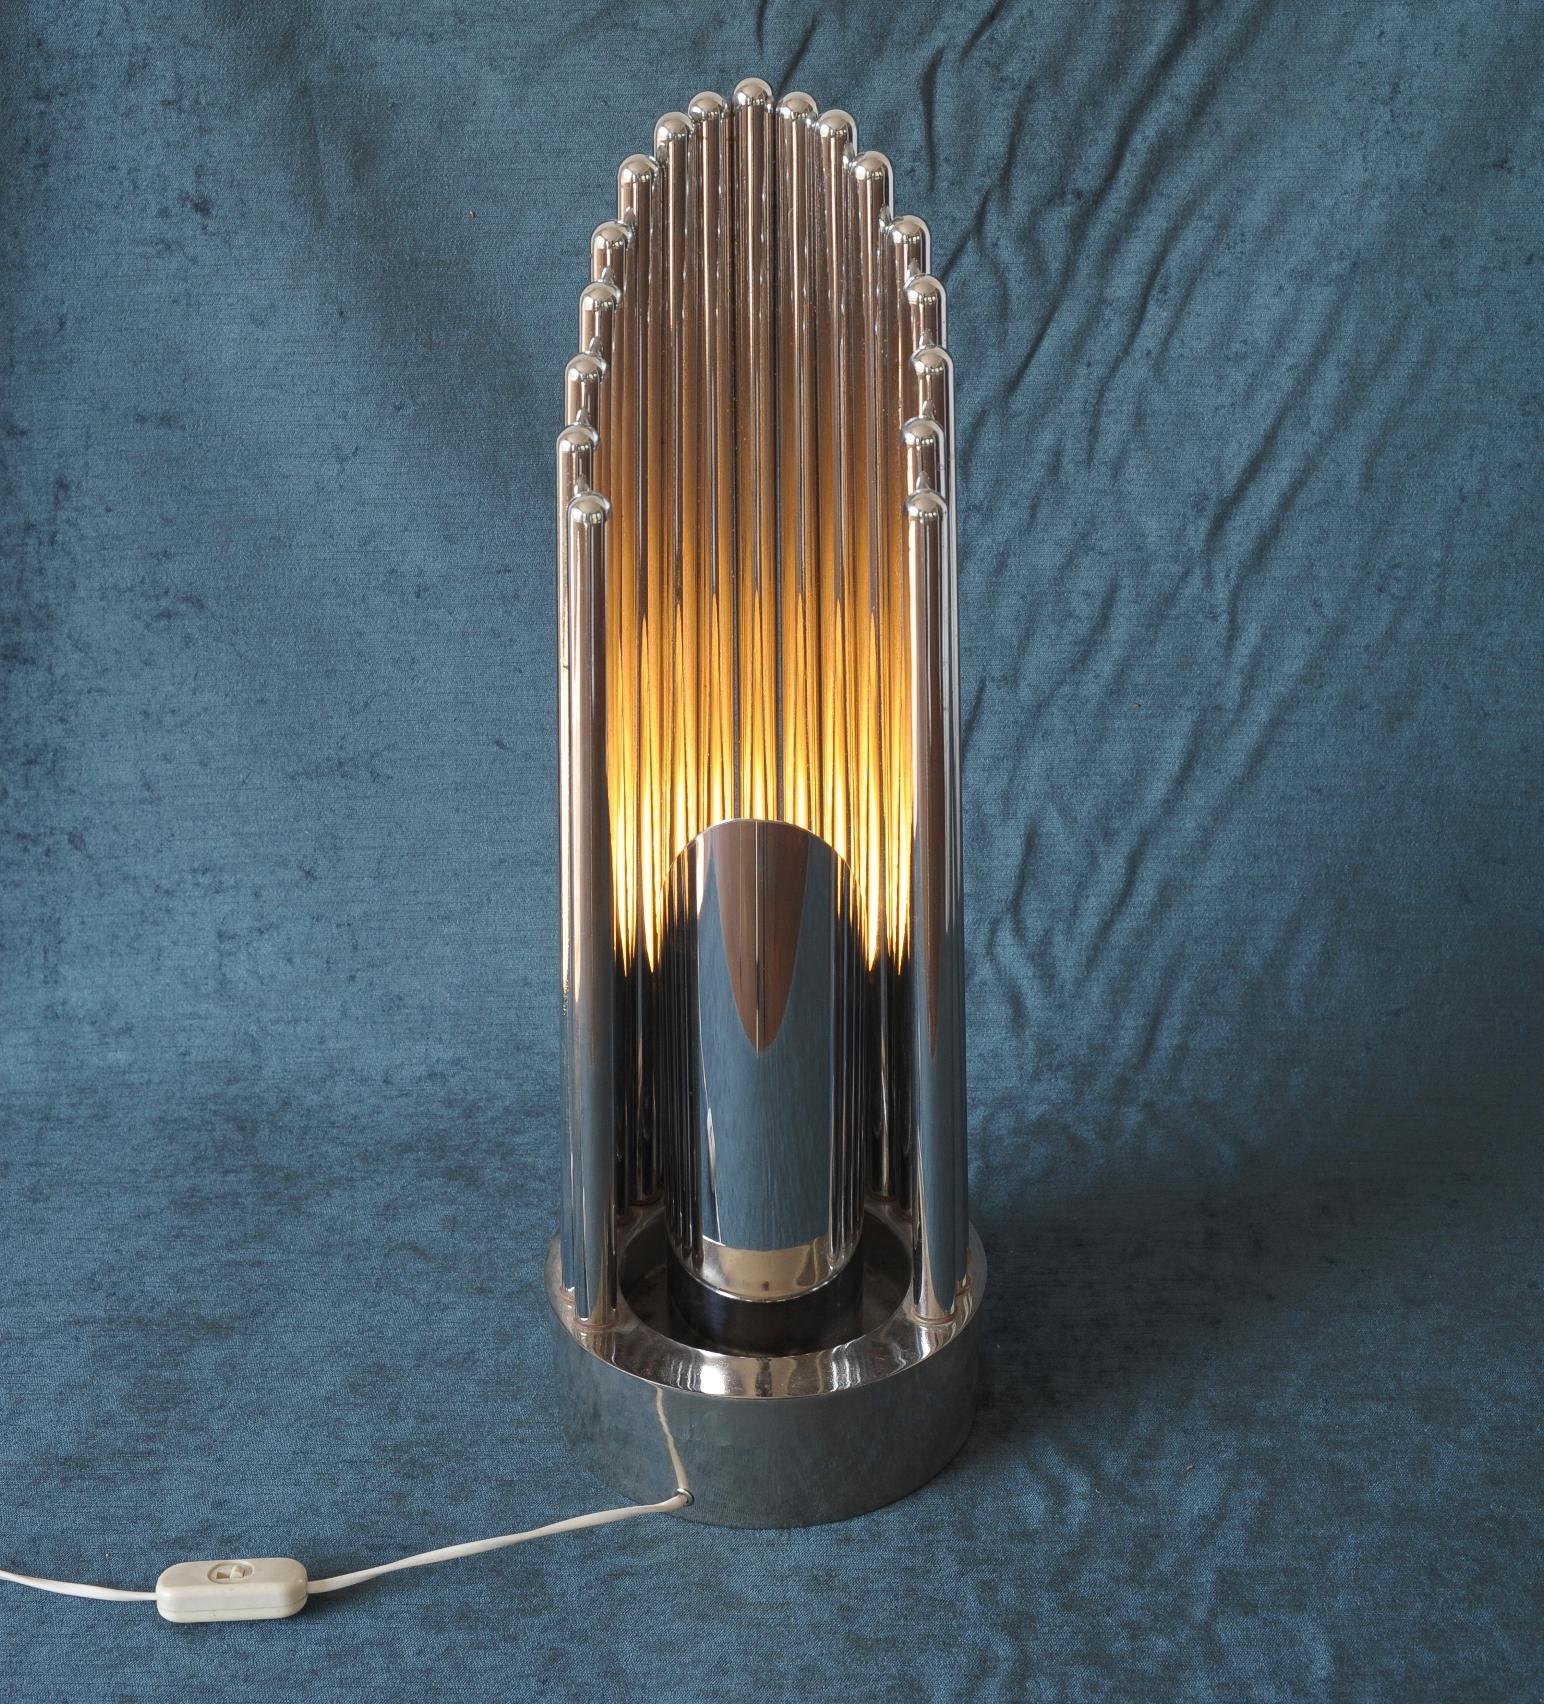 Italian Chrome Organ Pipe Table Lamp by Guzzini, Italy, 1970s For Sale